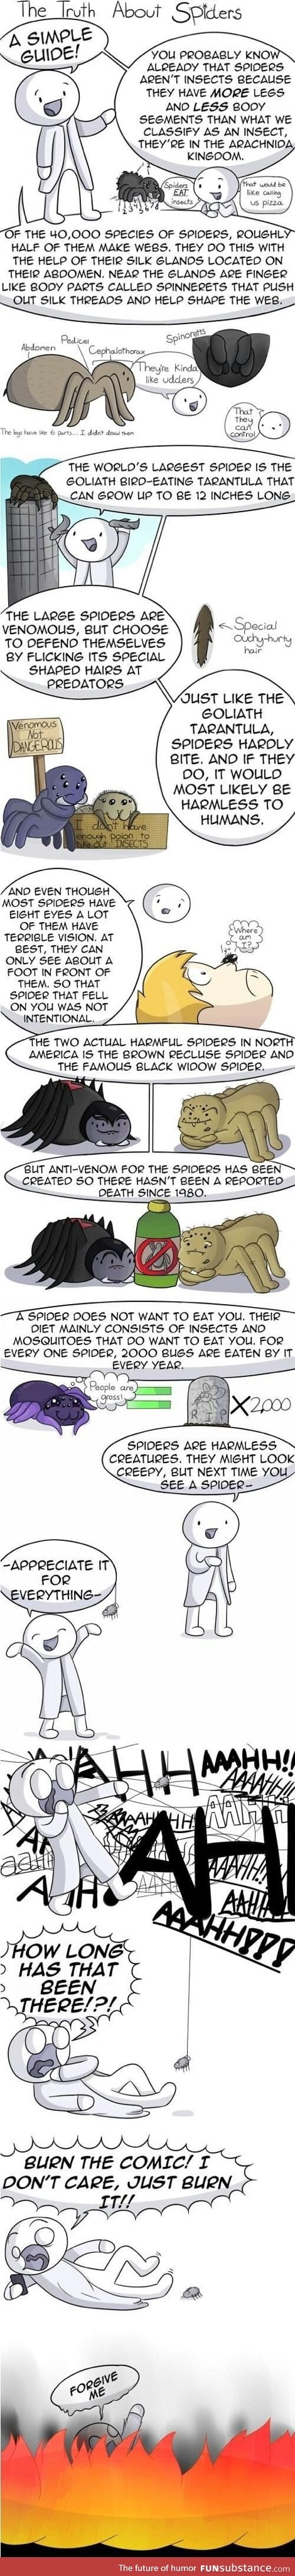 A little study about spiders...